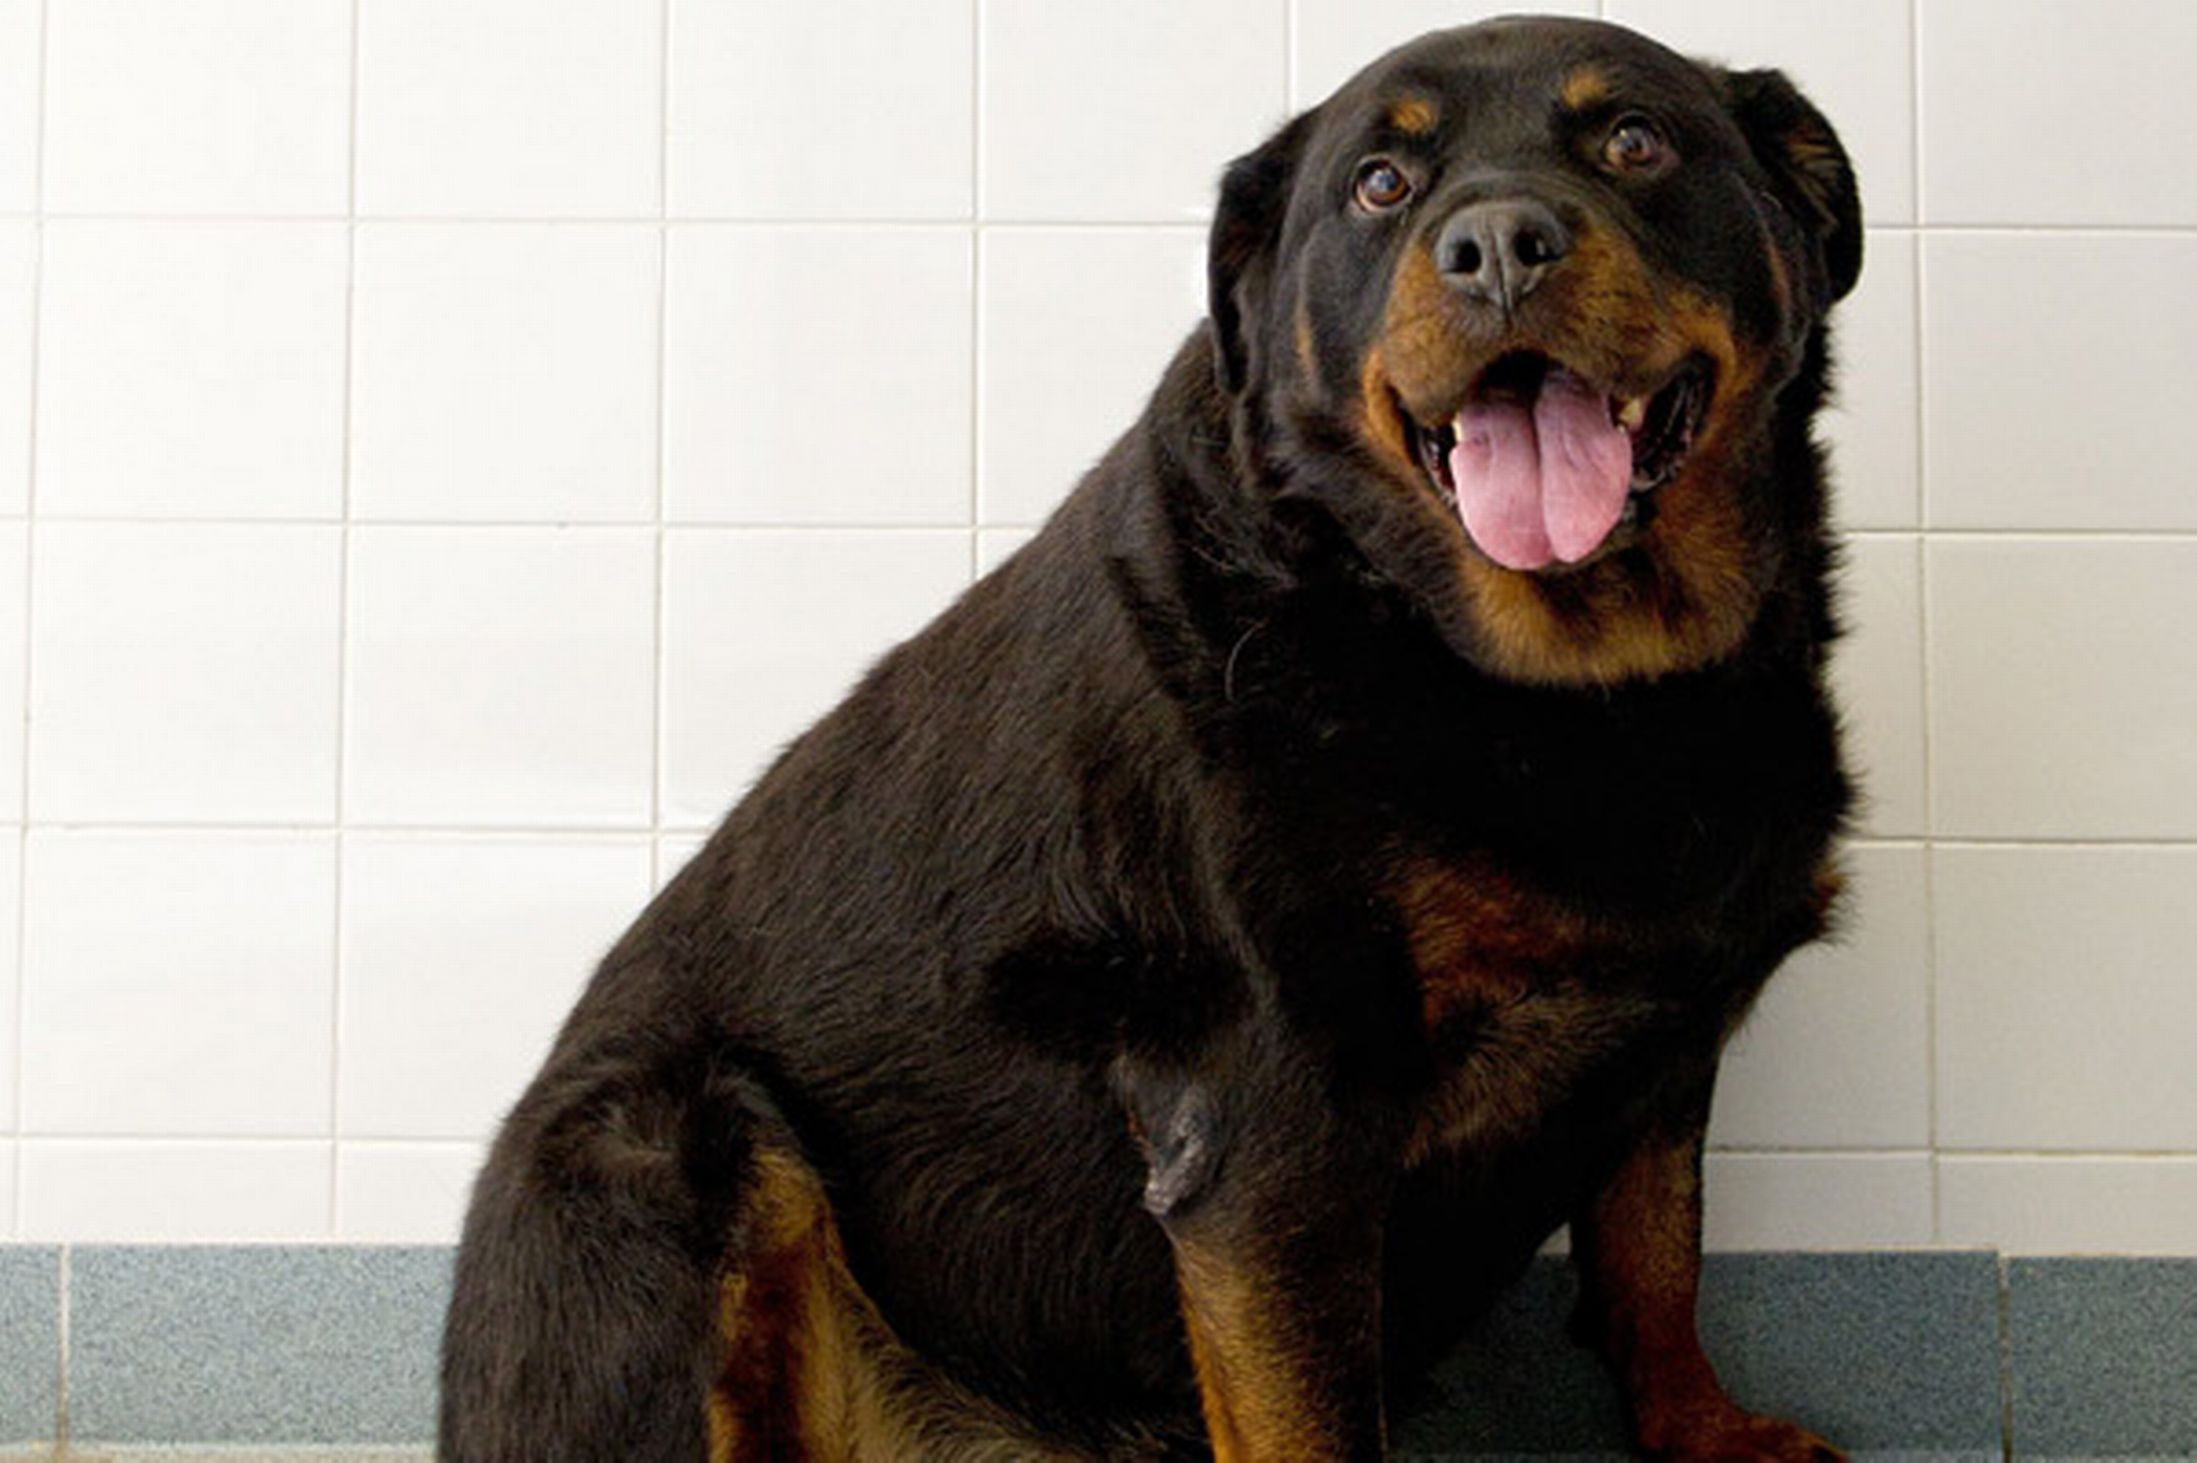 7 month old rottweiler at correct weight for his age